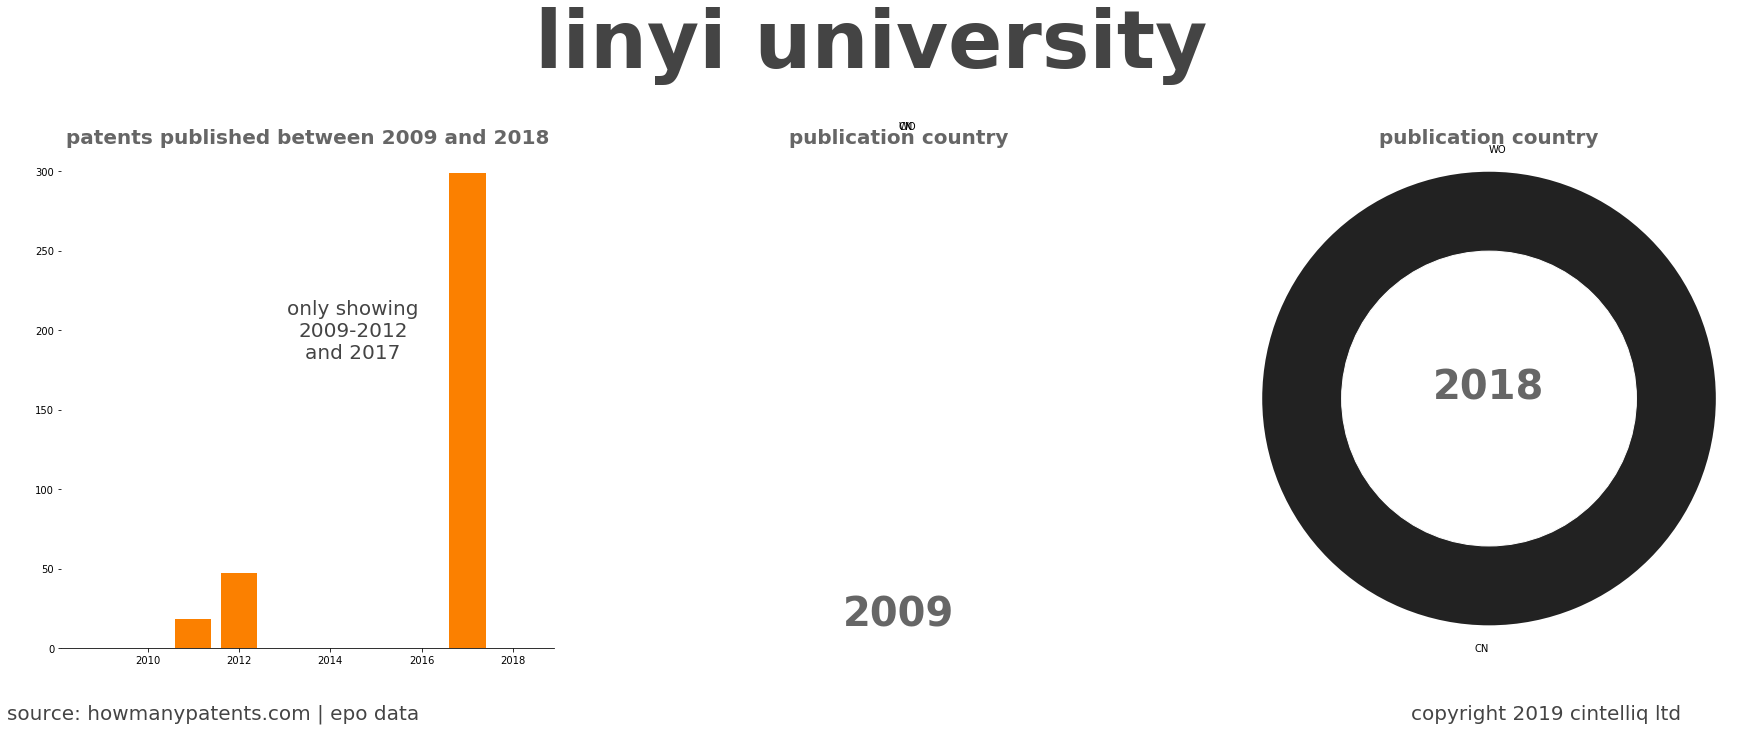 summary of patents for Linyi University